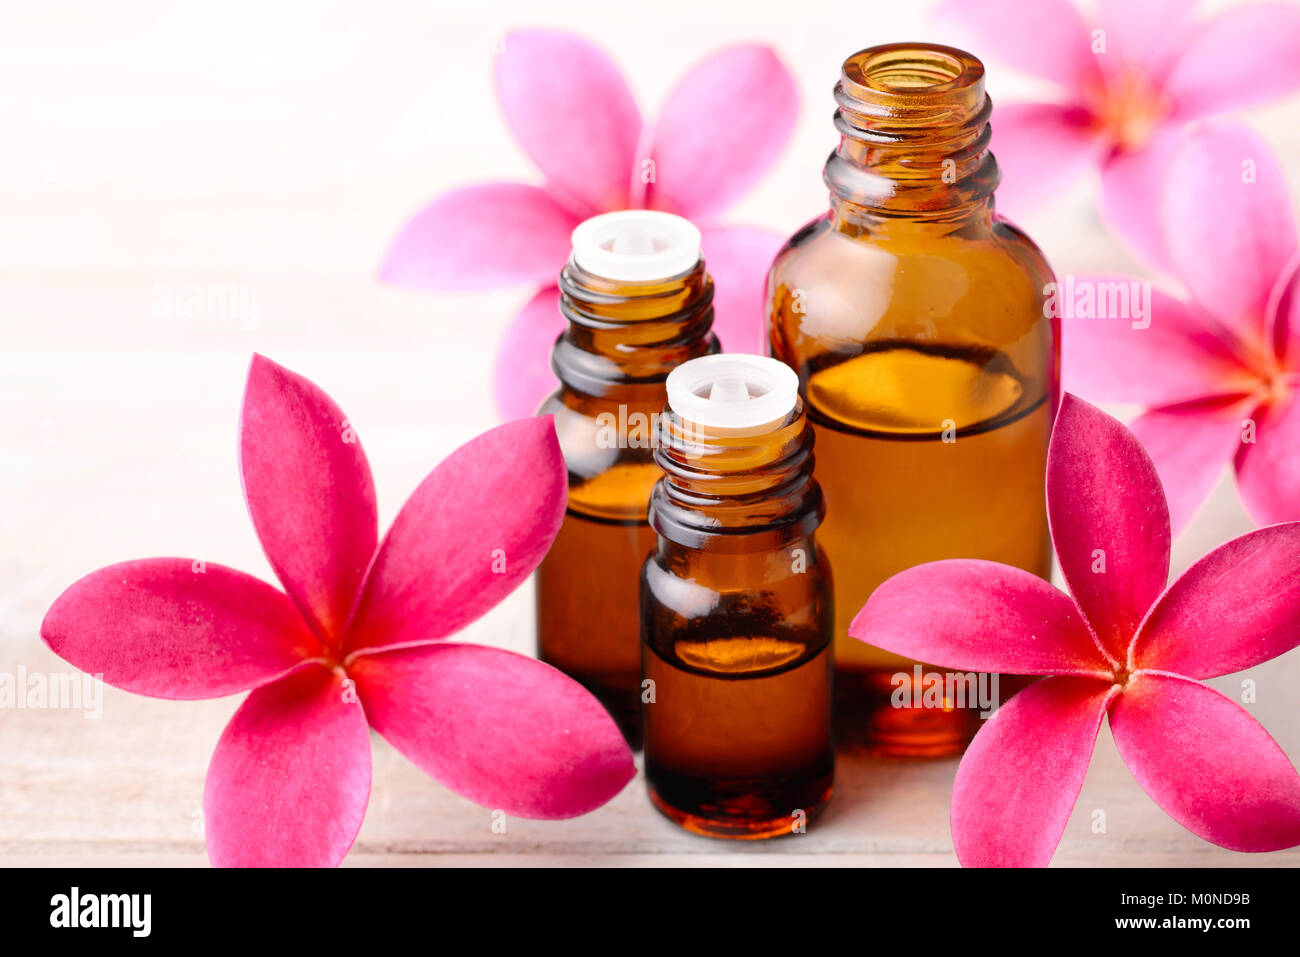 plumeria flowers and Plumeria Essential Oil Perfume on the wooden table  Stock Photo - Alamy